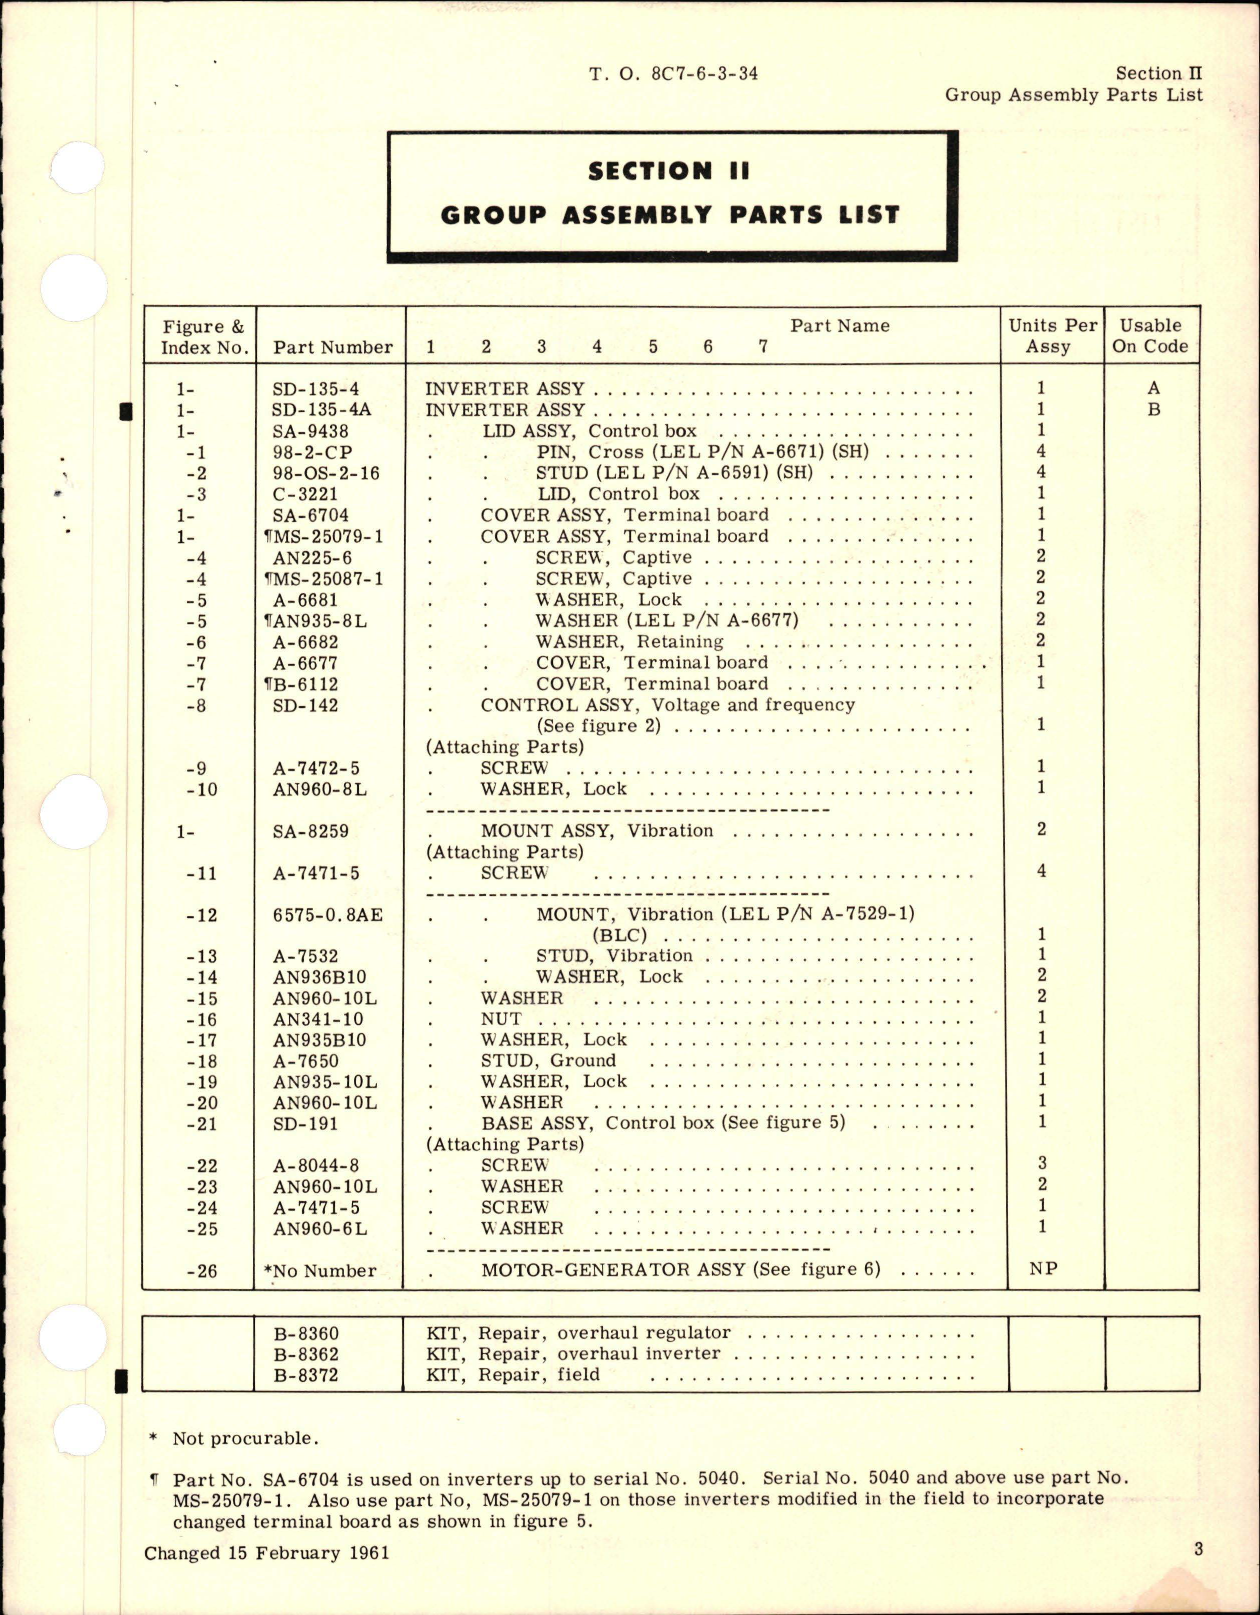 Sample page 9 from AirCorps Library document: Illustrated Parts Breakdown for Inverter Assembly - AN 3515-1 - Parts SD-135-4 and SD-135-4A